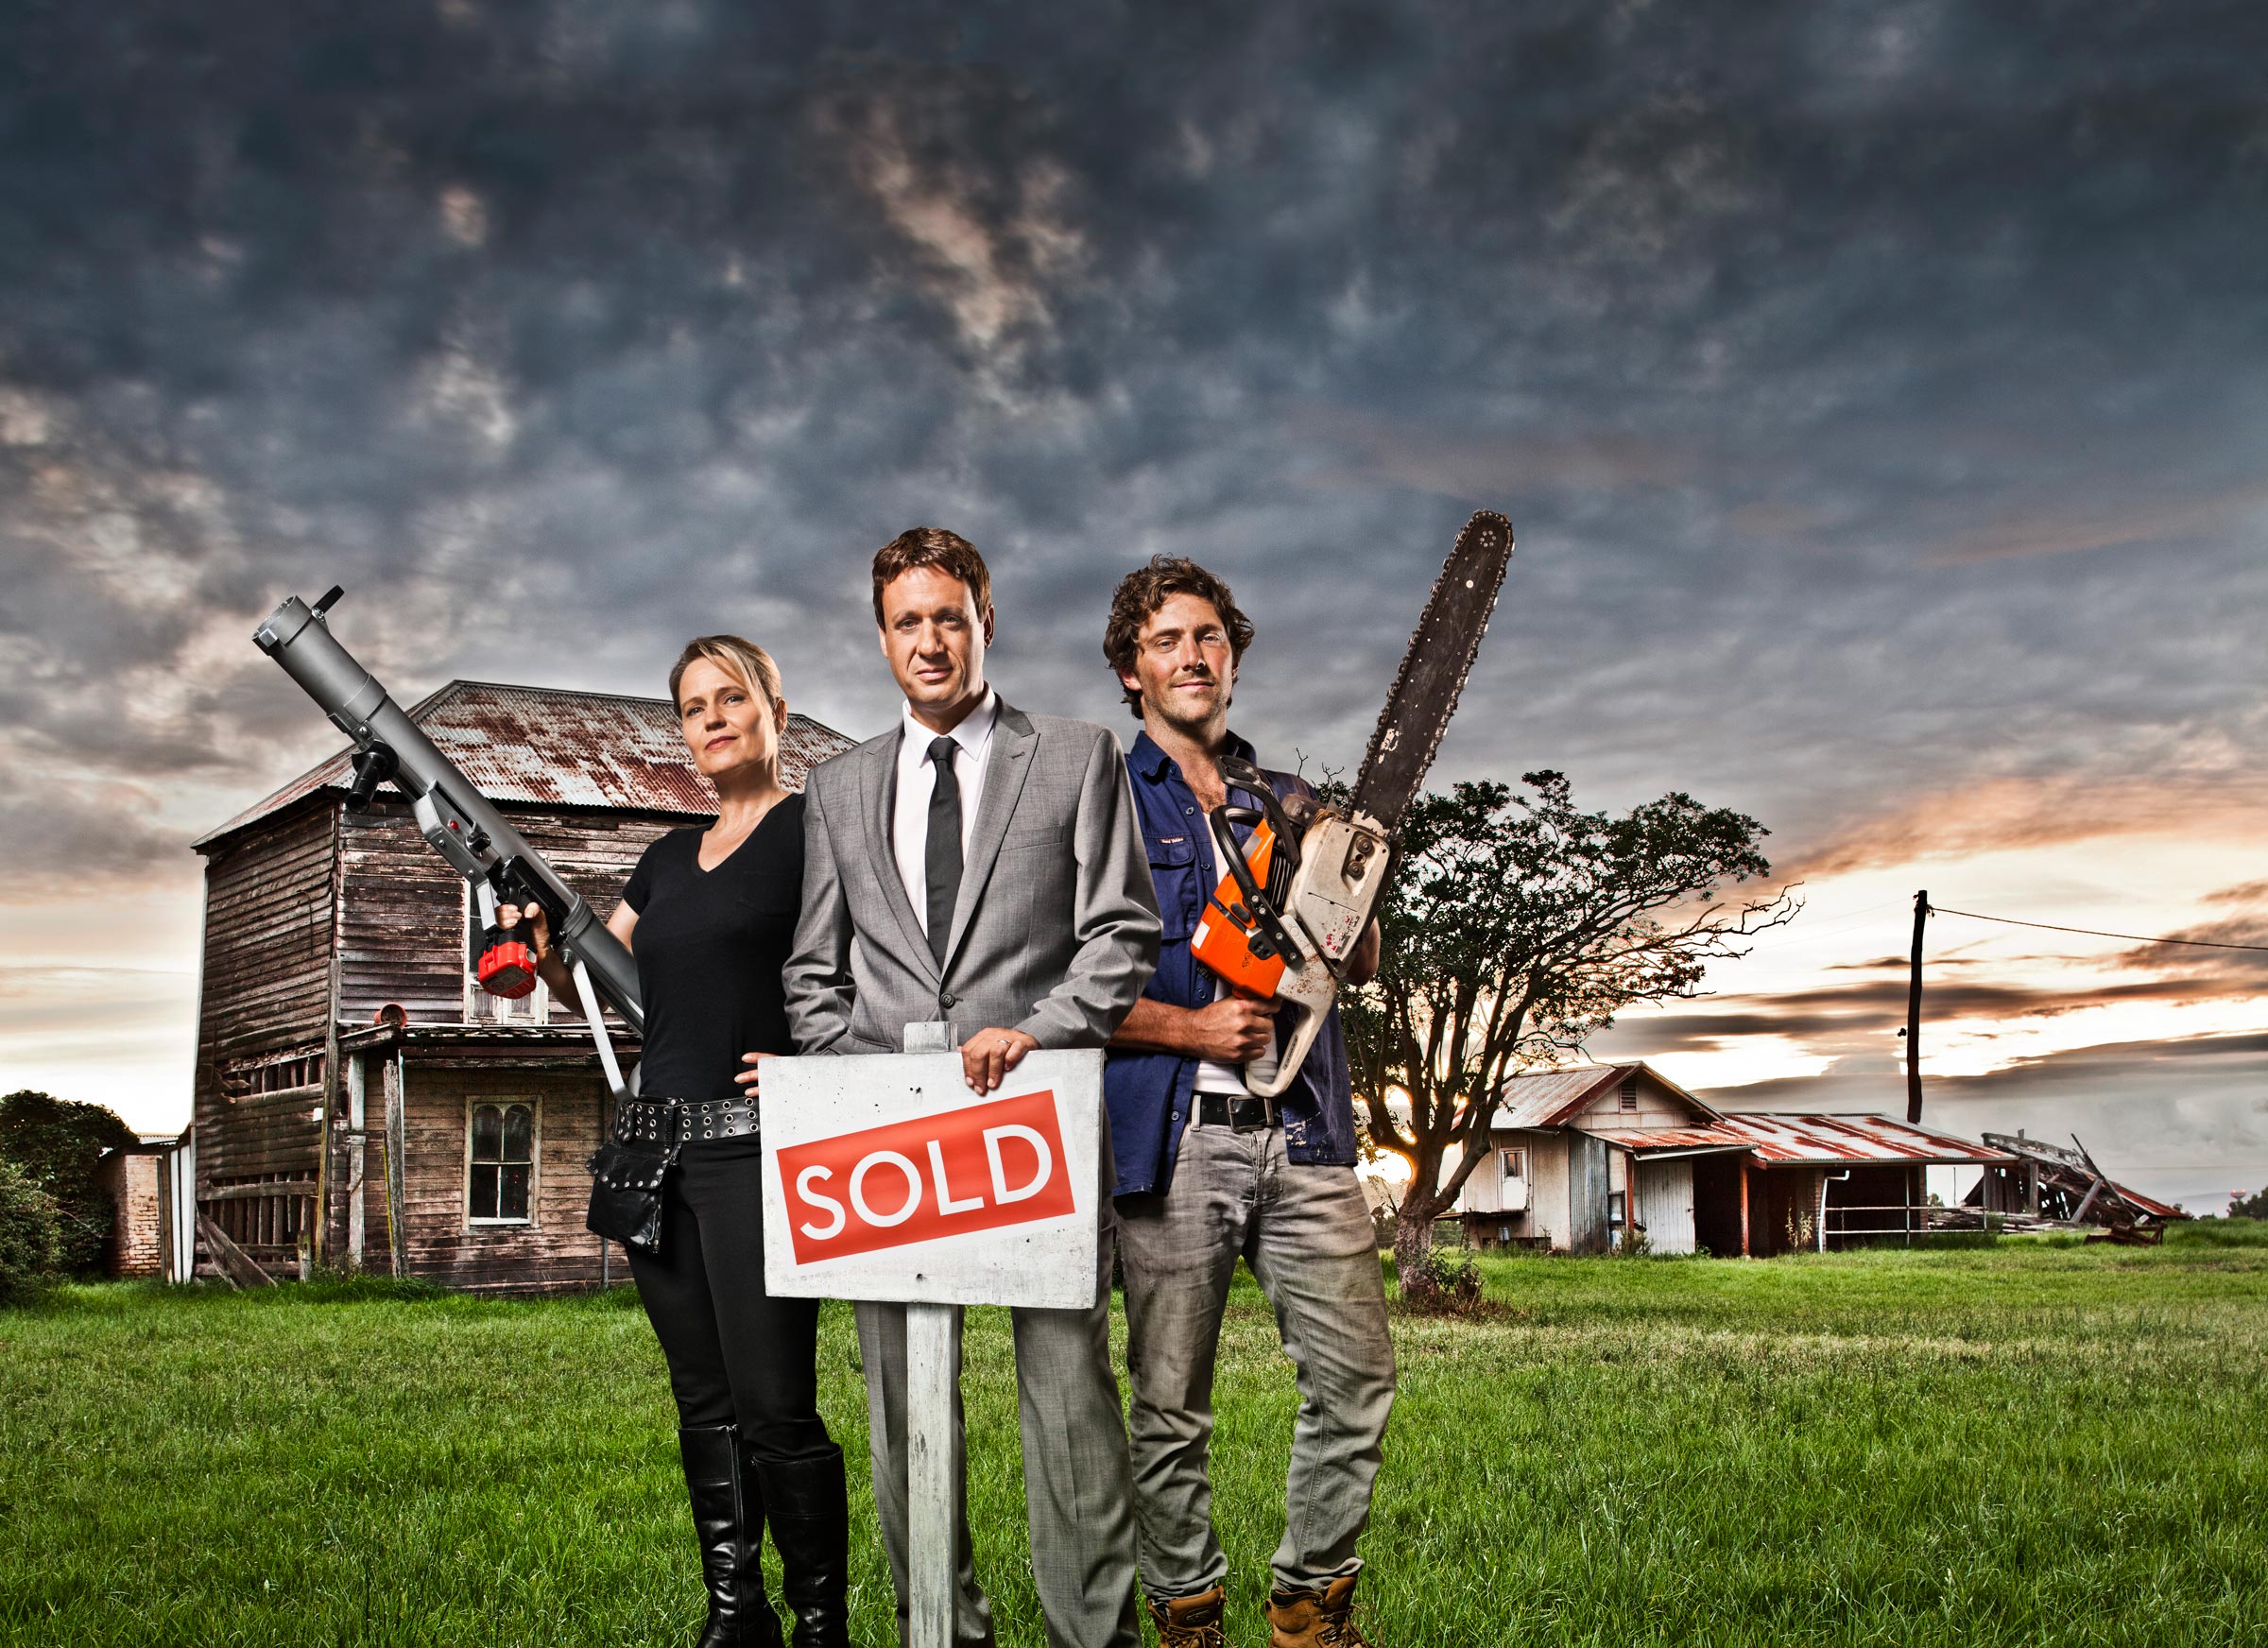 Advertising photography Selling Houses Shaynna holding power tool Andrew SOLD sign Charlie holding chainsaw by old house